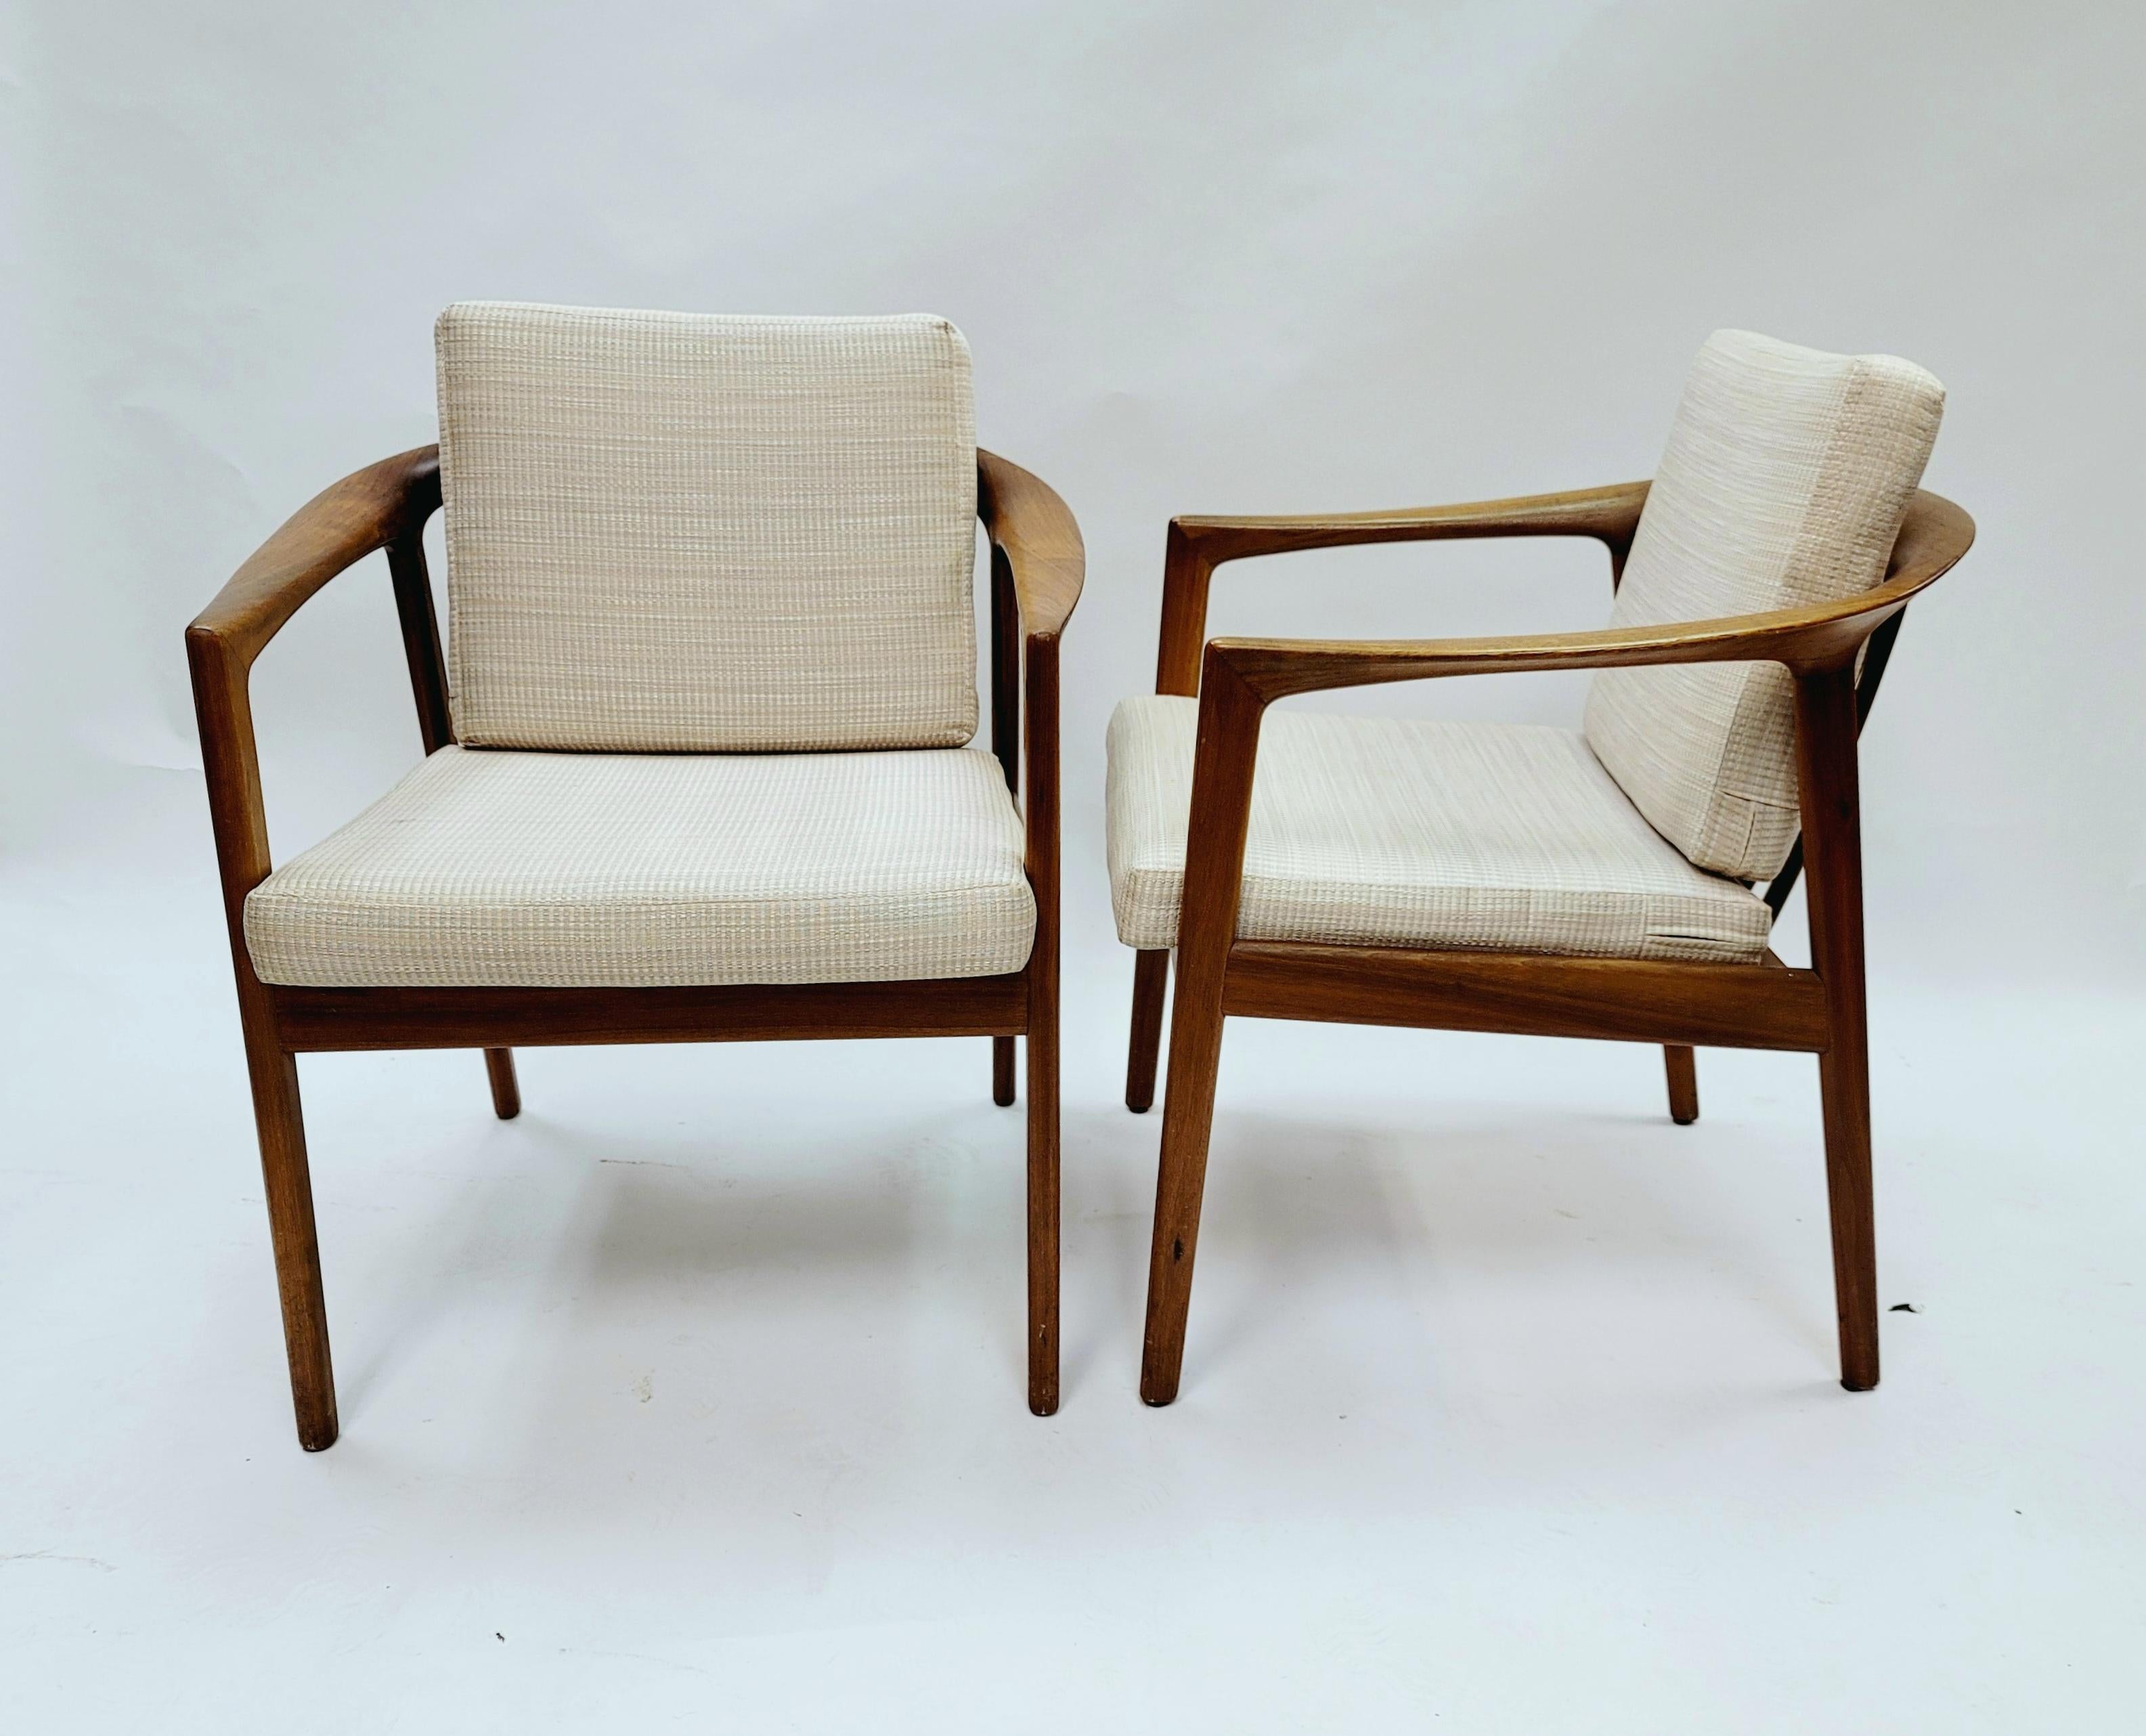 20th Century Folke Ohlsson for DUX Furniture Pair of Armchairs